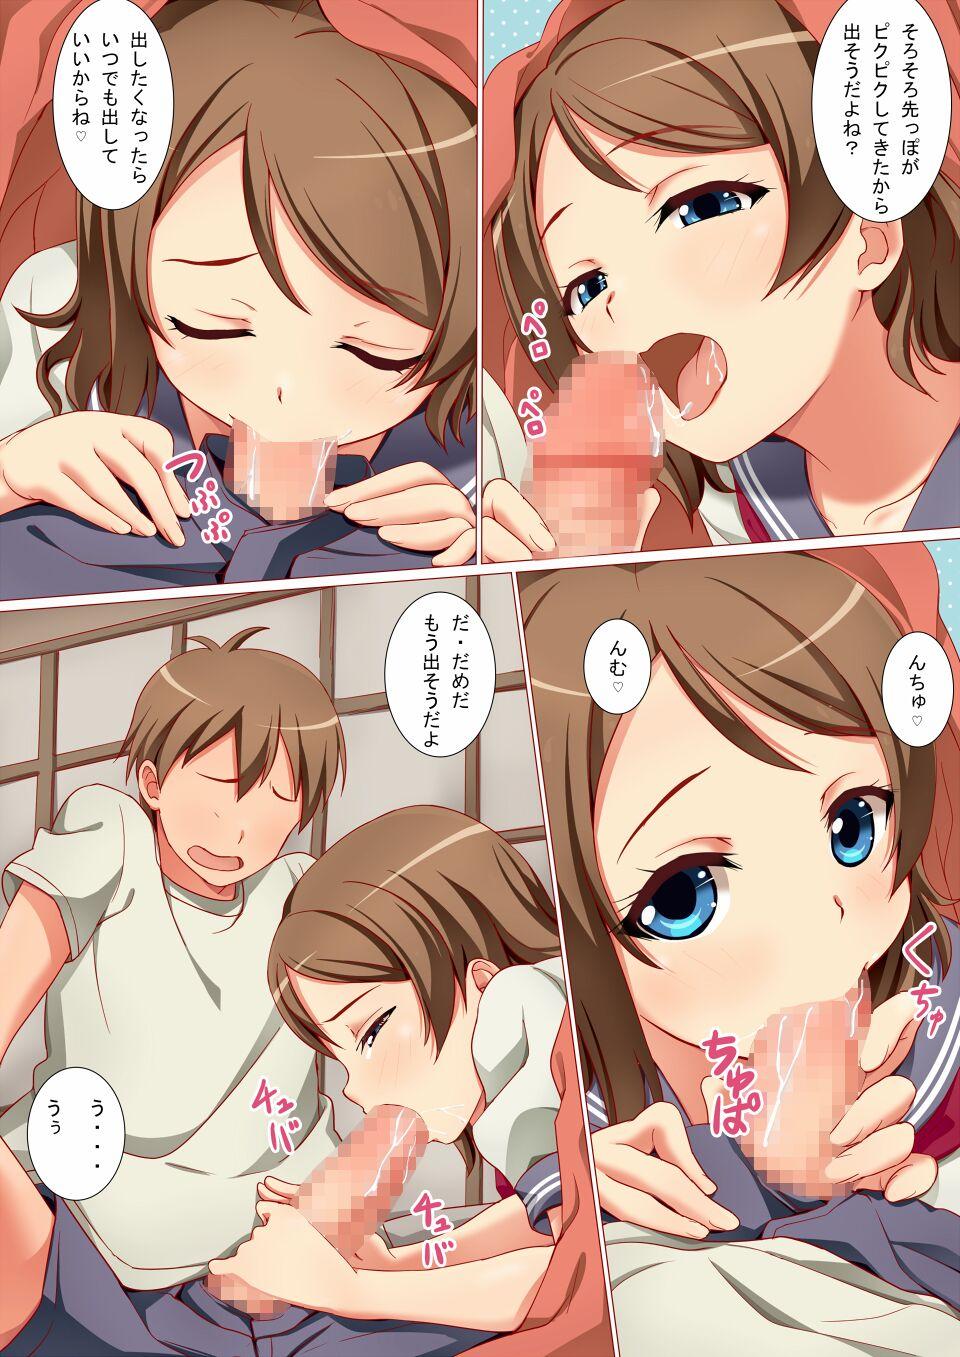 Gloryhole Morning flirting between two people - Love live sunshine Top - Page 4